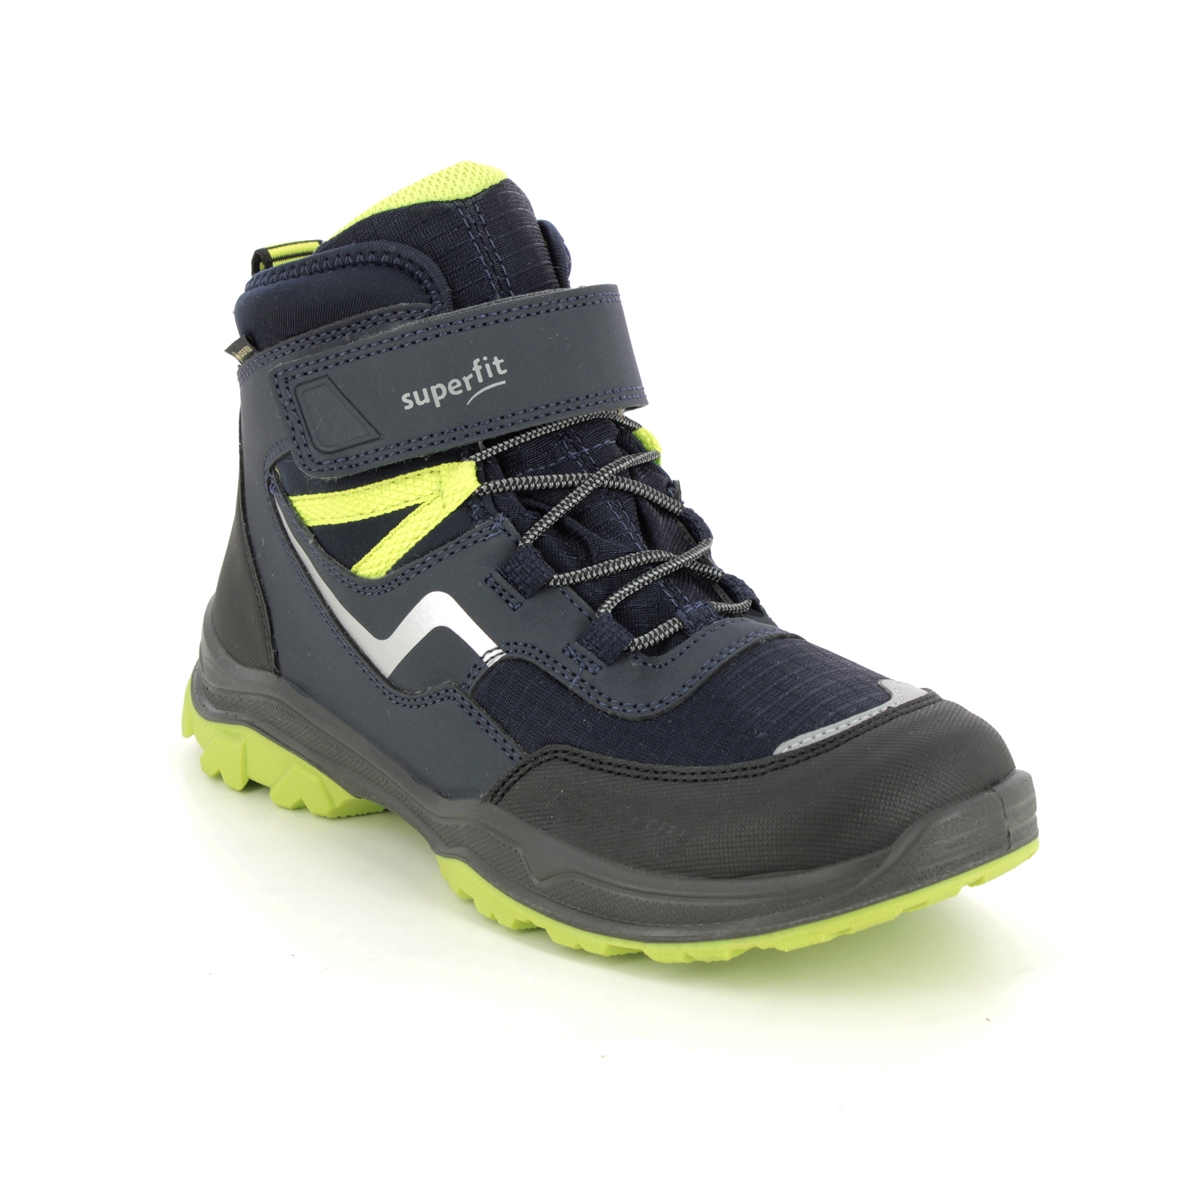 Superfit Jupiter Bungee Gtx Navy Lime Kids Boys Boots 1000074-8000 In Size 36 In Plain Navy Lime For kids